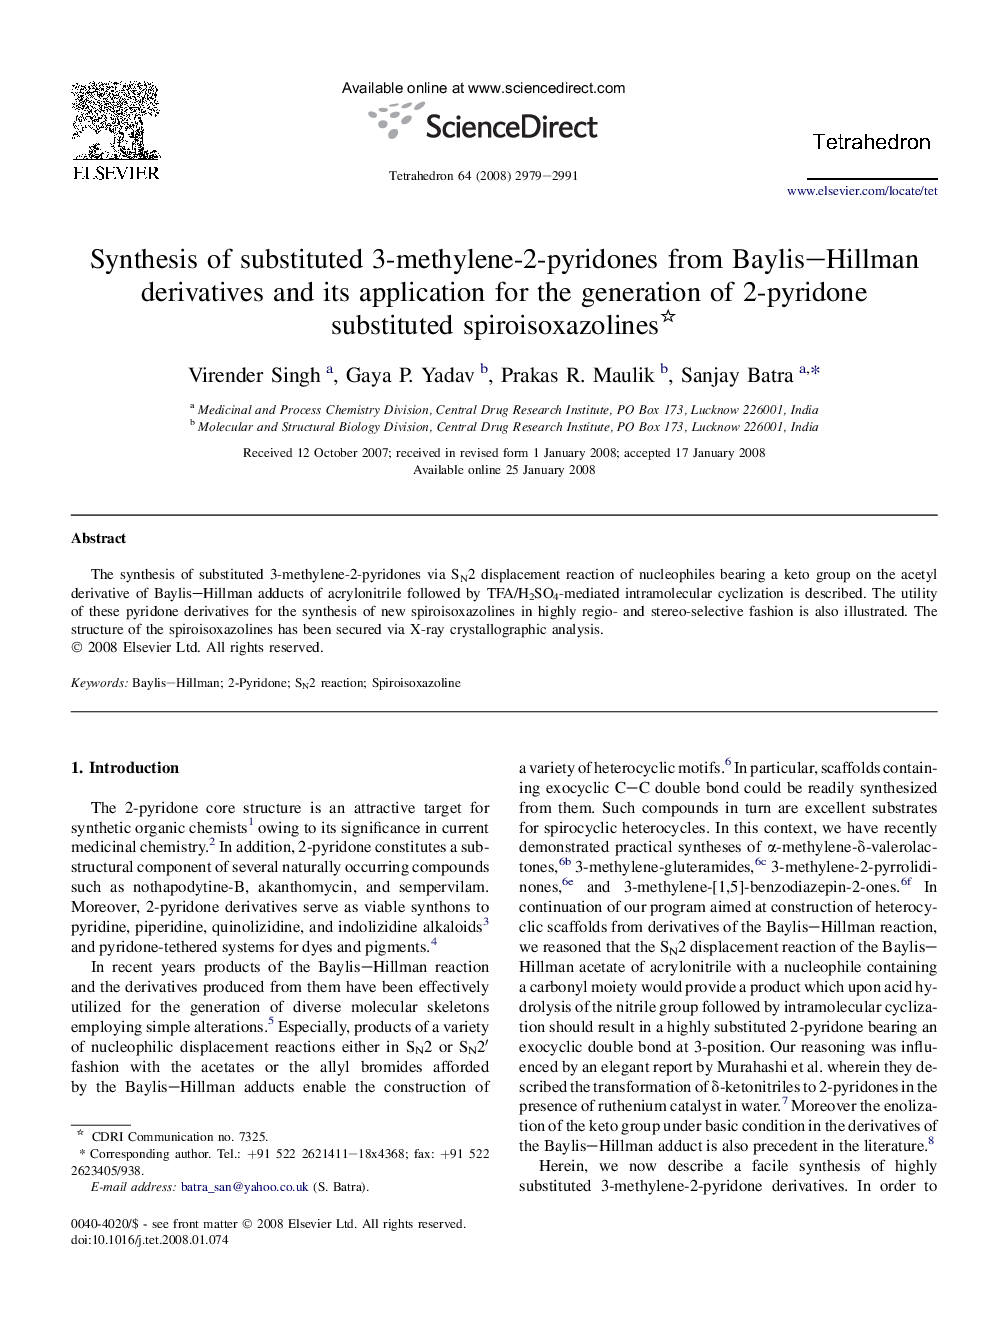 Synthesis of substituted 3-methylene-2-pyridones from Baylis-Hillman derivatives and its application for the generation of 2-pyridone substituted spiroisoxazolines